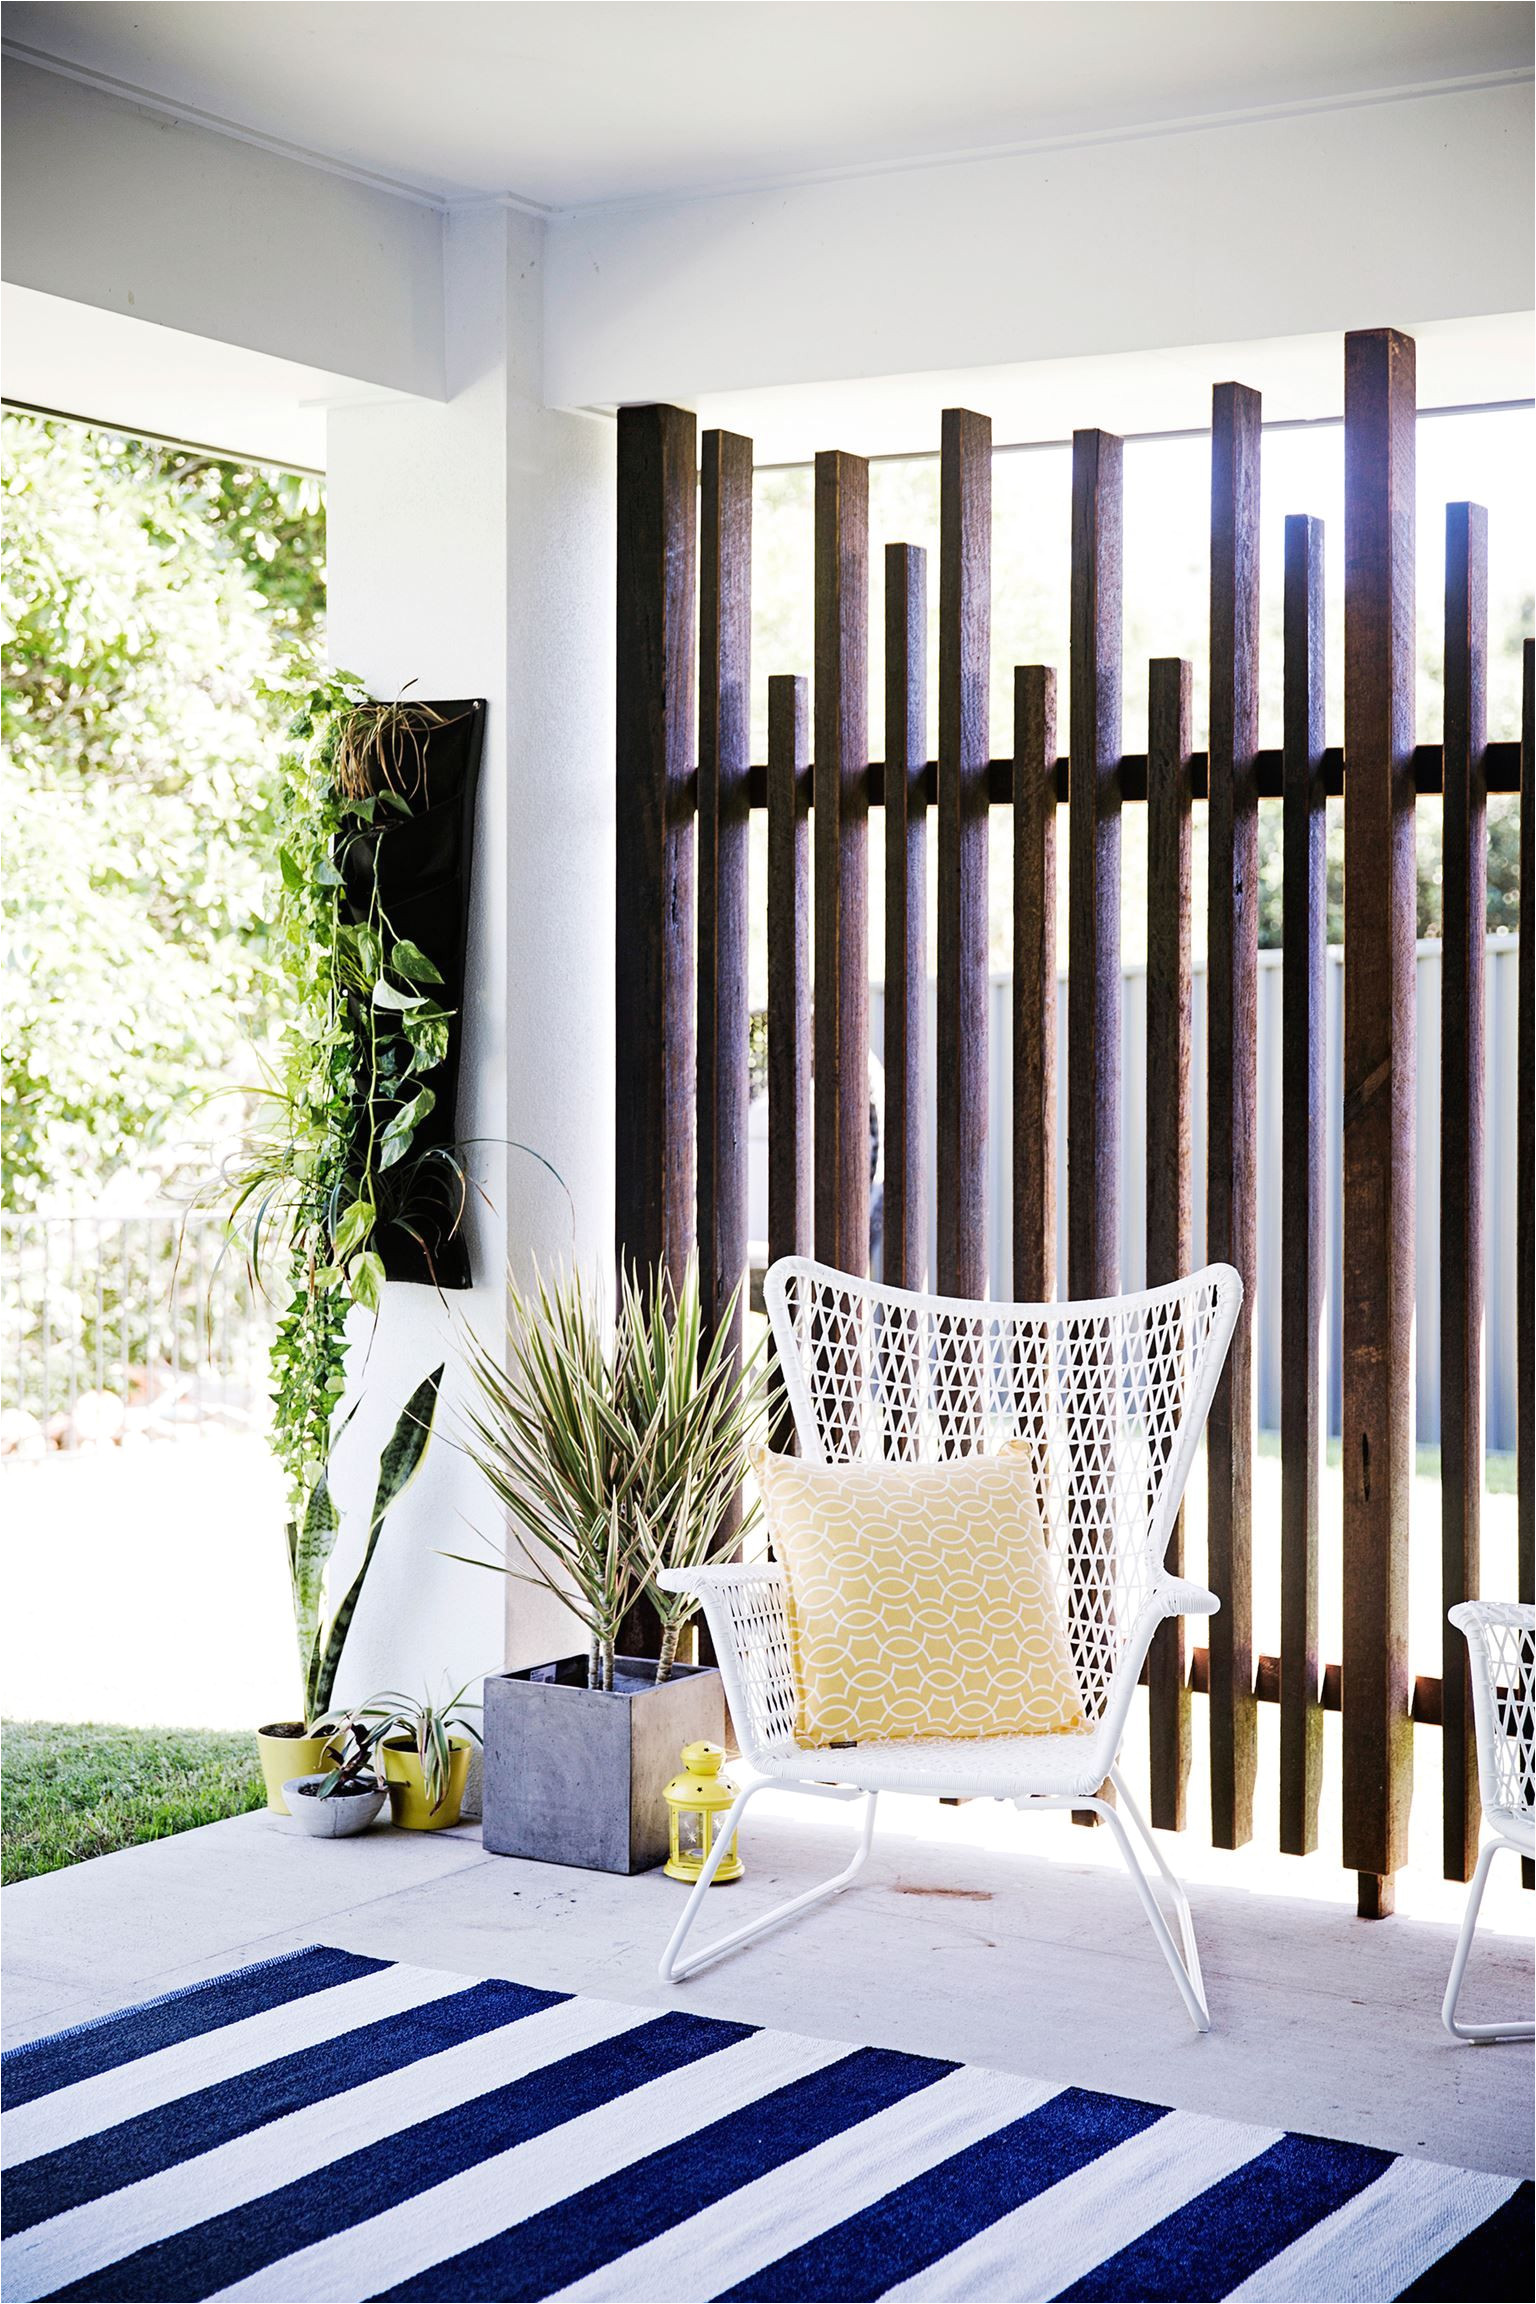 no matter the size of your outdoor space you can create privacy and intimacy with creative budget friendly fence options